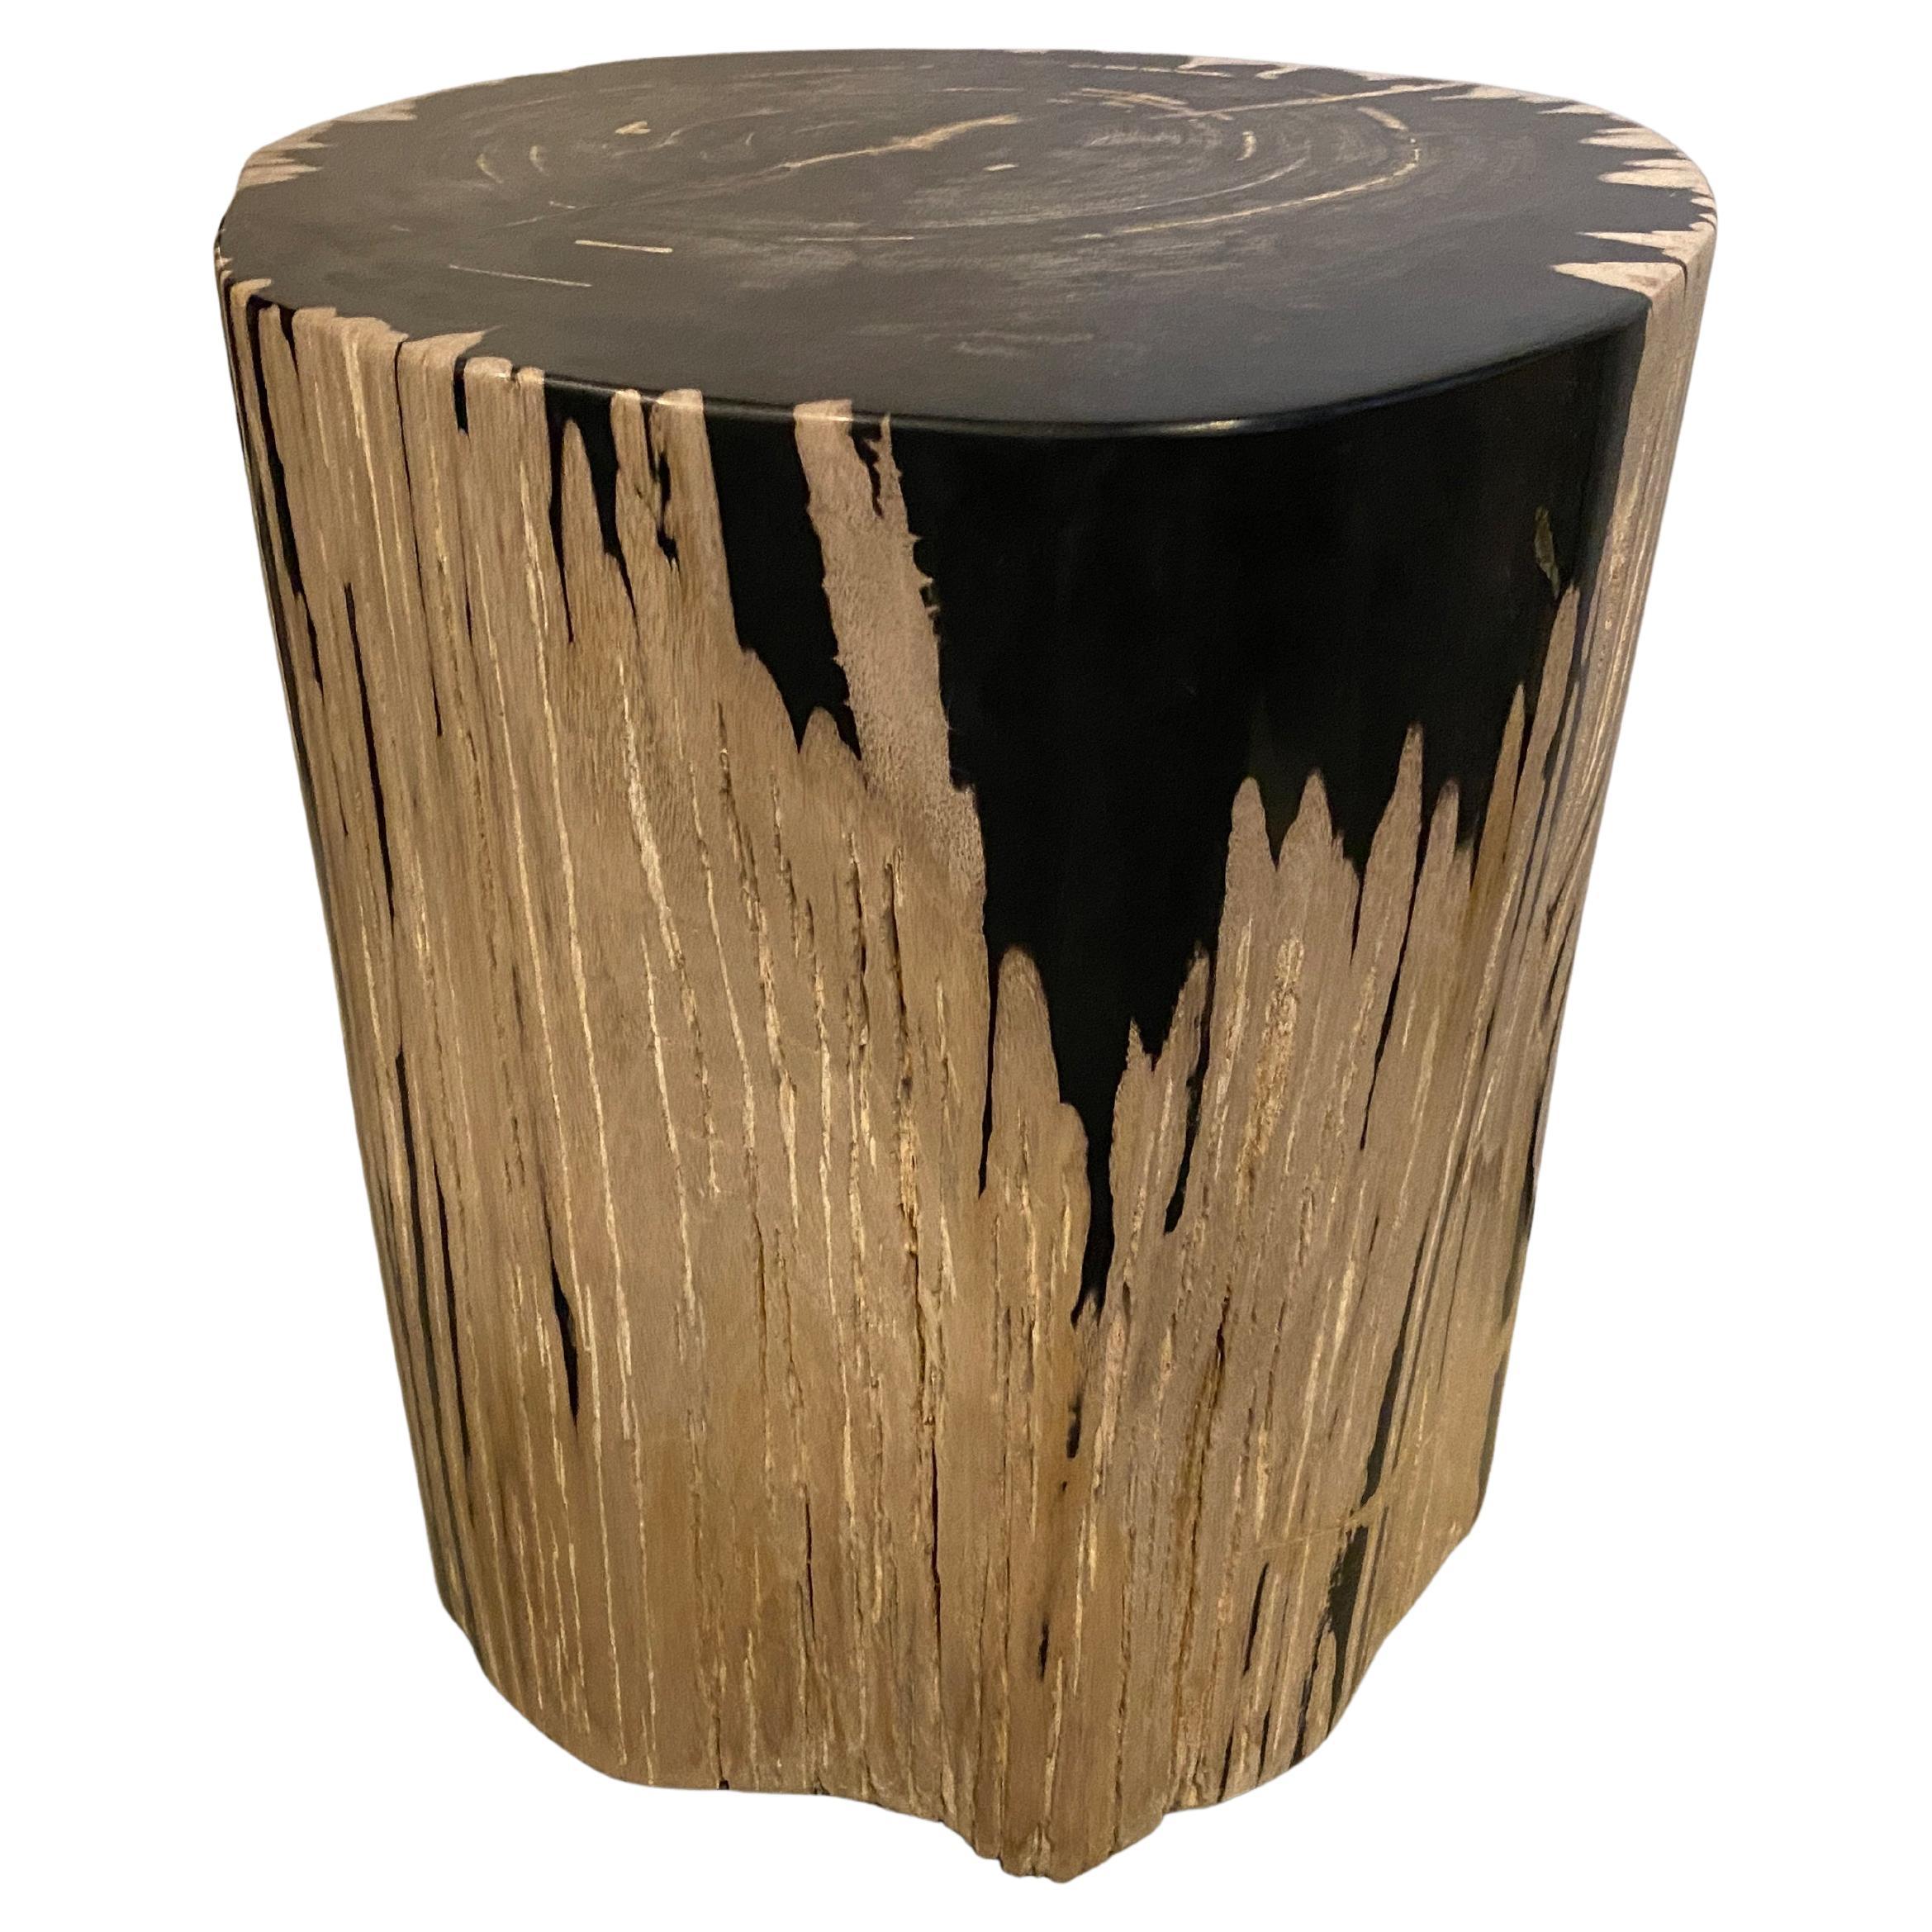 Andrianna Shamaris Exquisite High Quality Petrified Wood Side Table